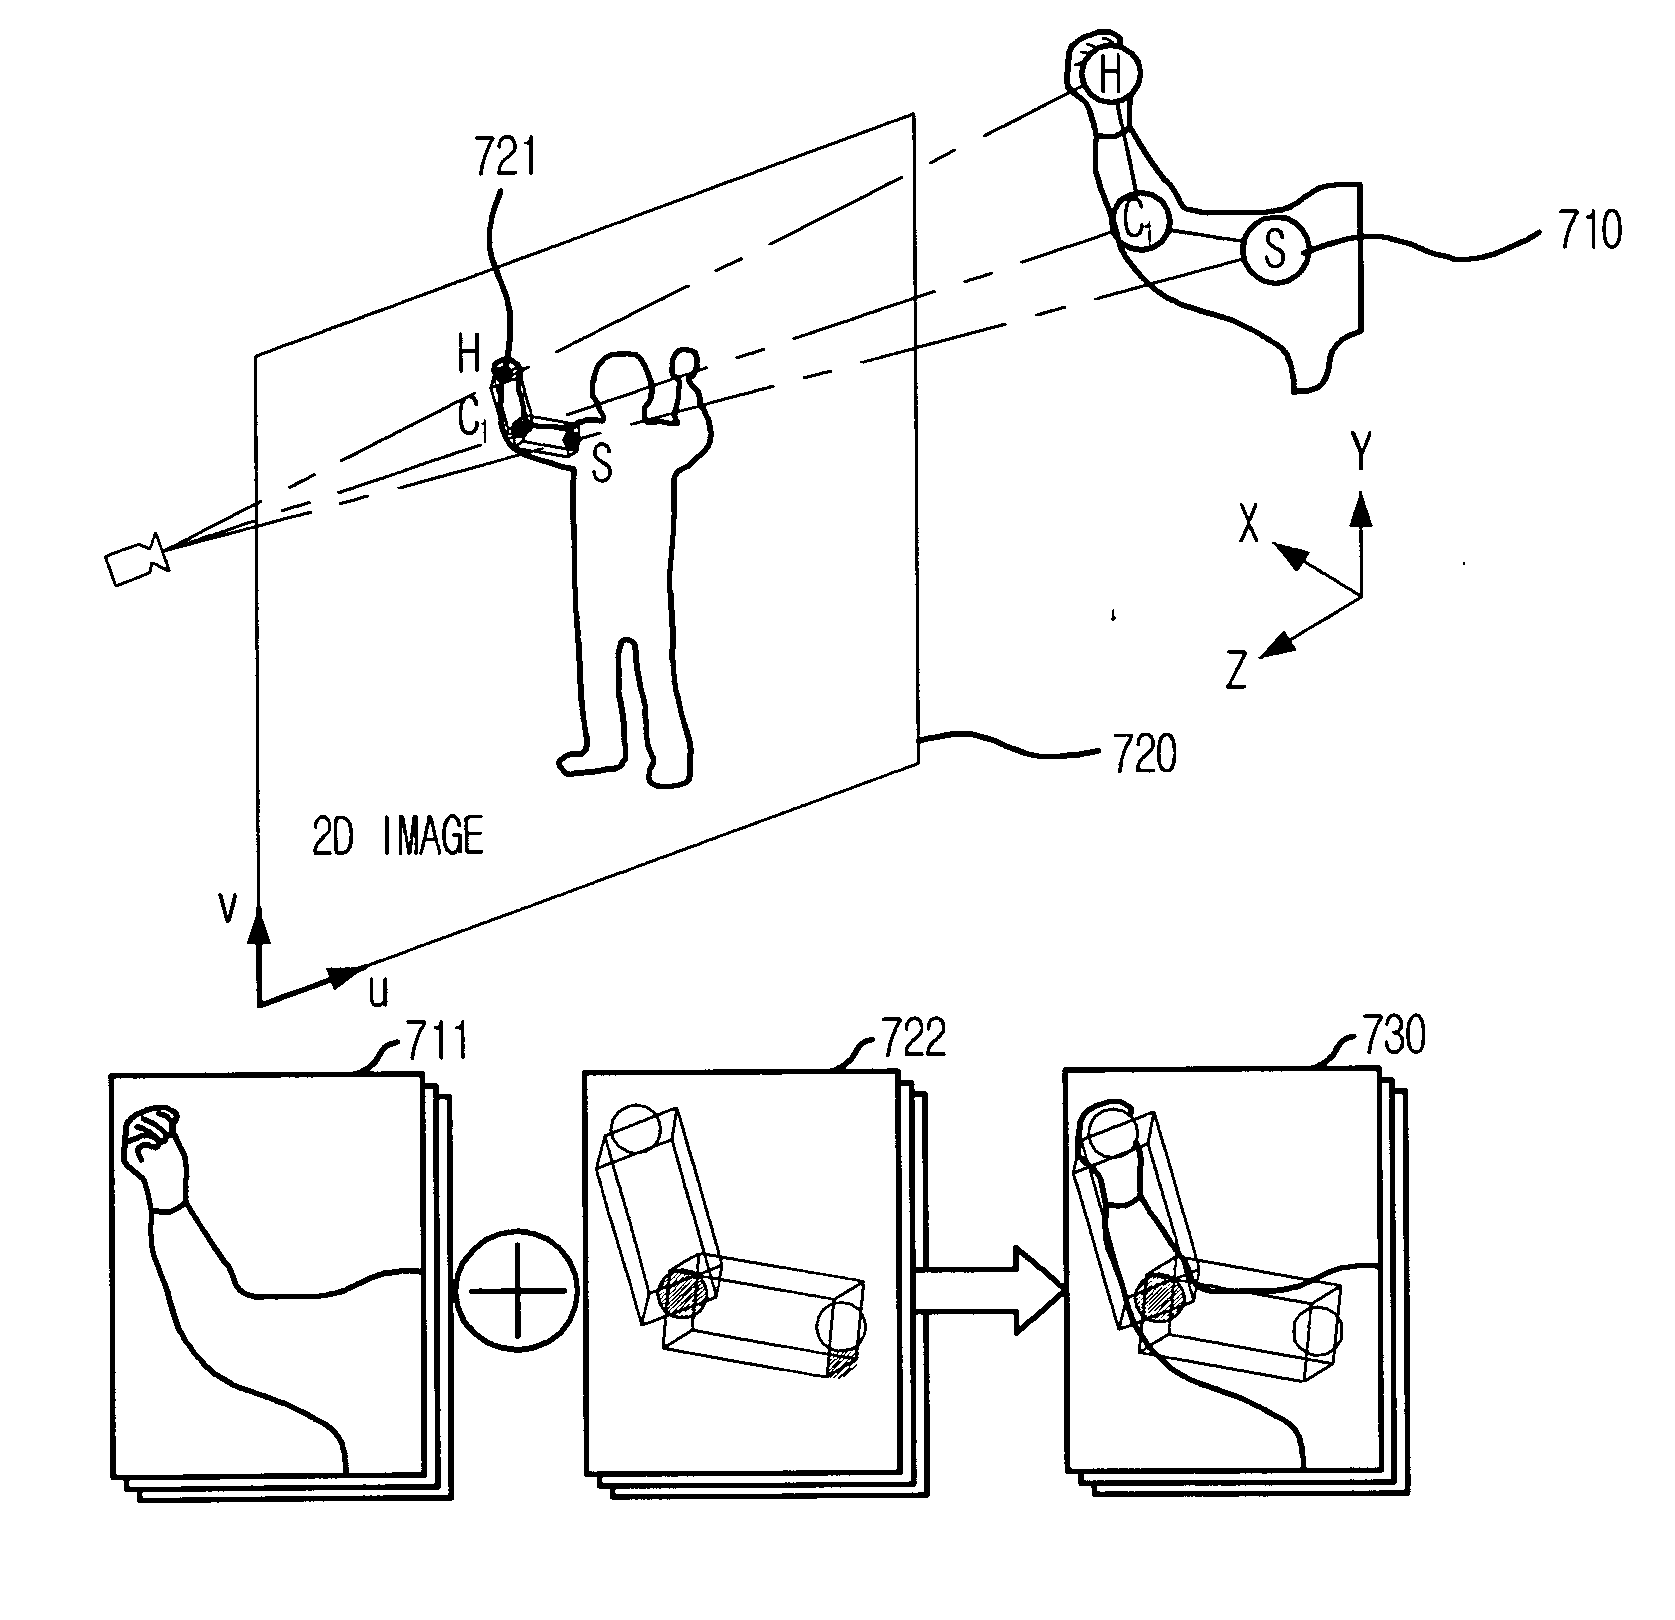 Method for estimating three-dimensional position of human joint using sphere projecting technique